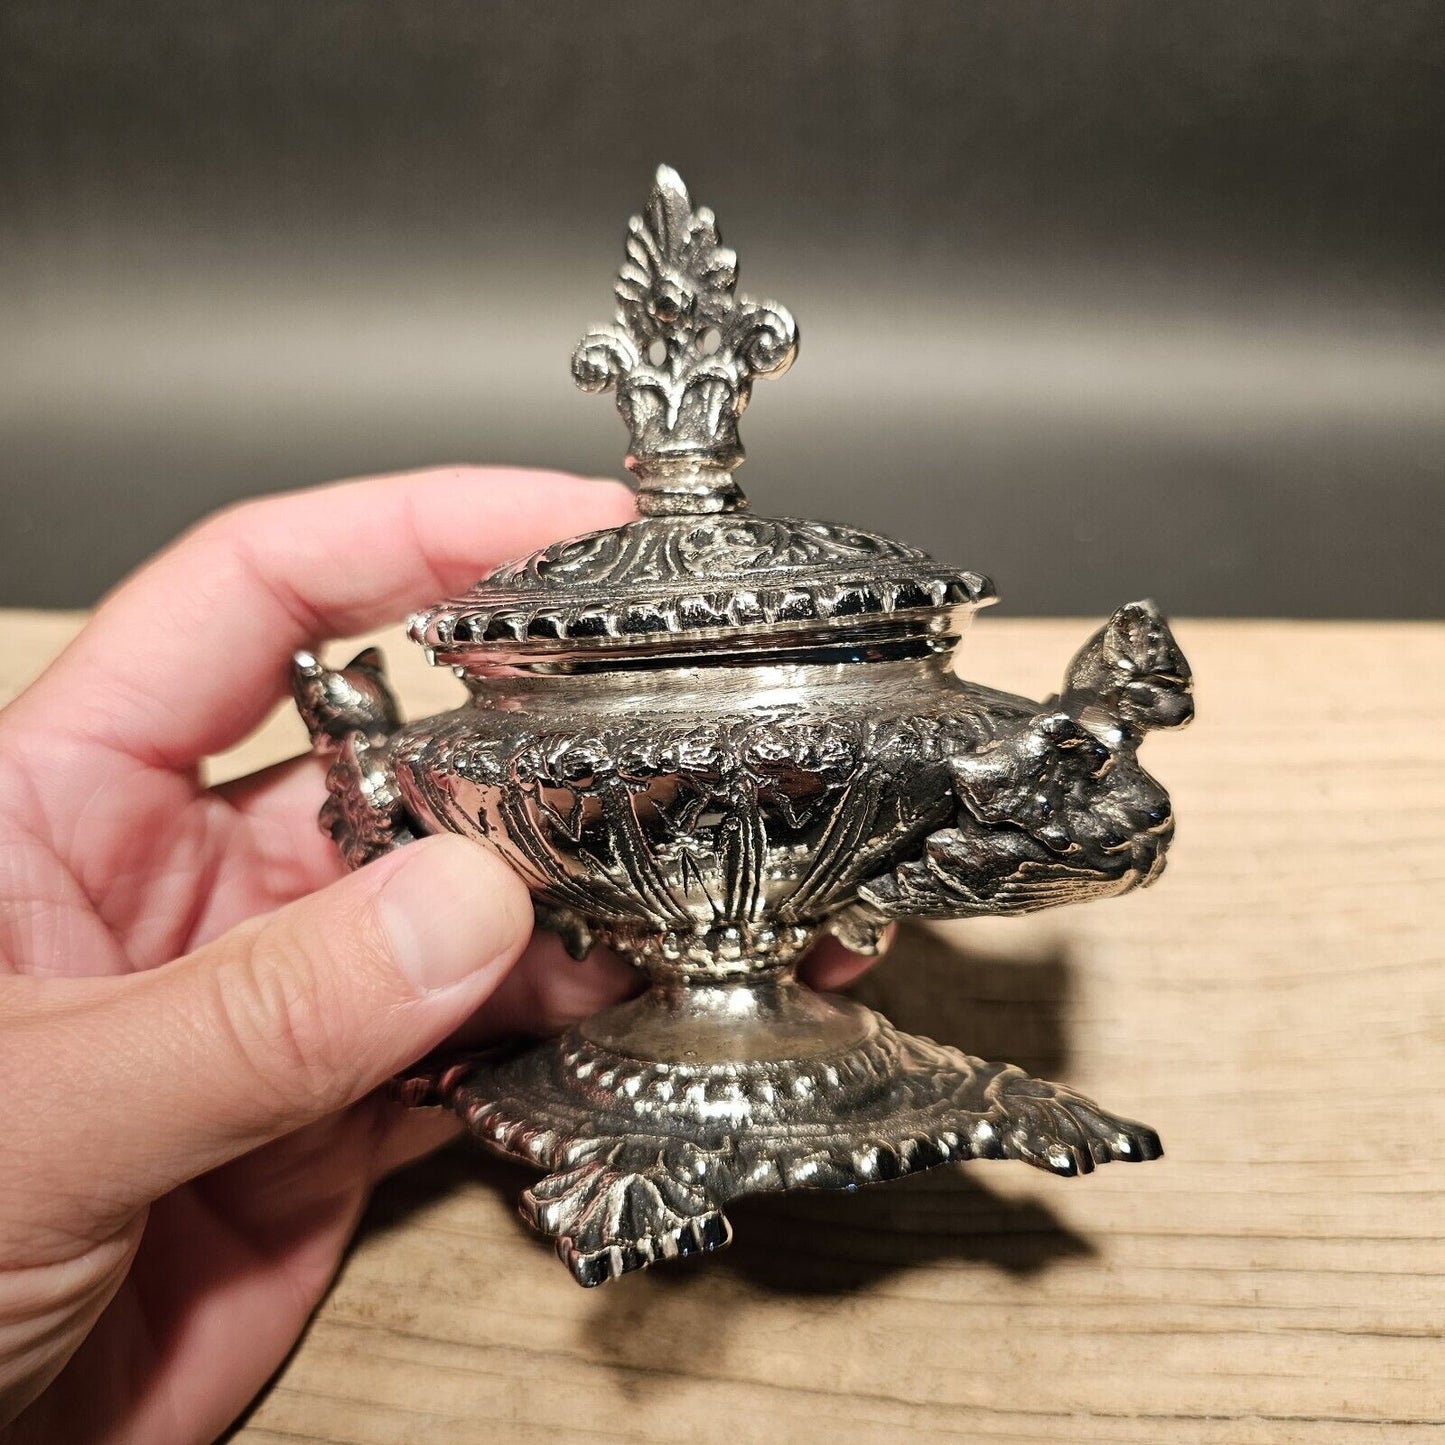 Antique Style Ornate Nickel Plated Brass Inkwell Desk Stand